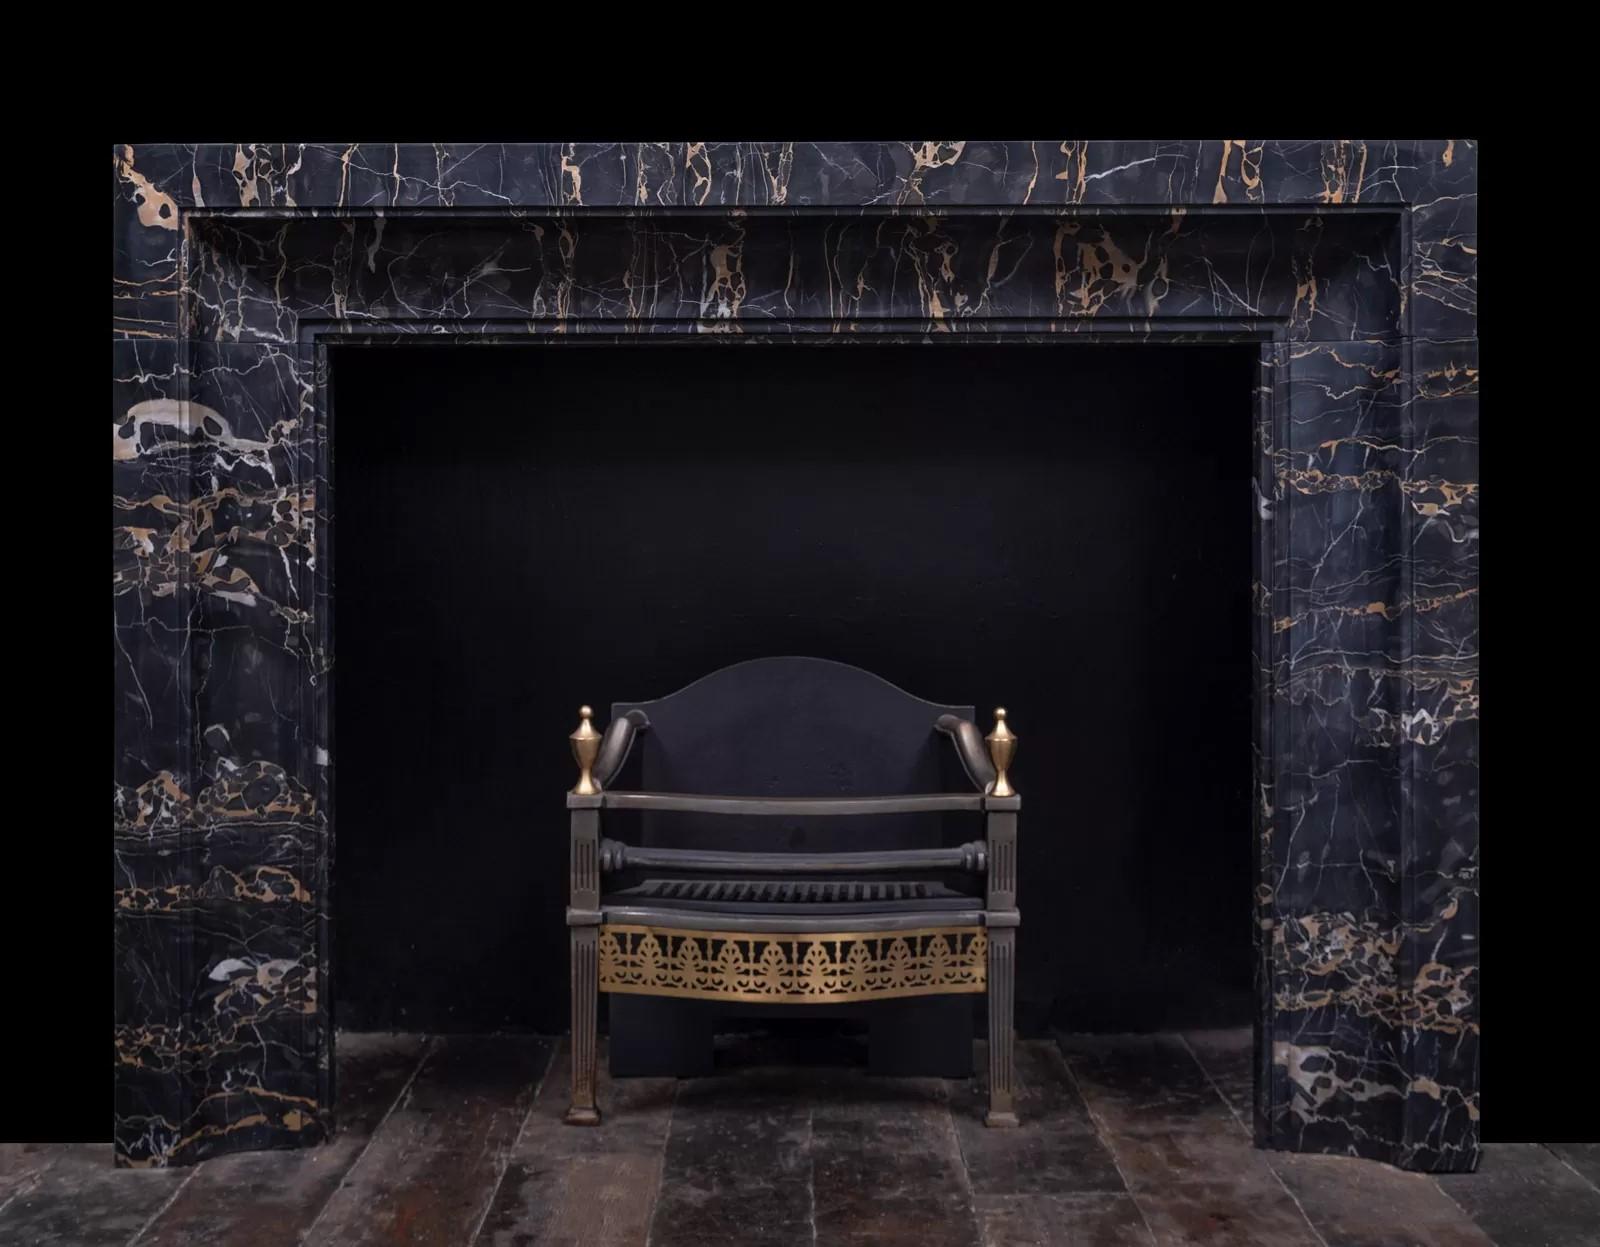 An Art Deco inspired fireplace surround made in stunning and semi-precious Nero Portoro marble by Ryan and Smith.

With vibrant markings that flow in the direction of the fireplace opening.

Nero Portoro is an Italian marble extracted only in Porto